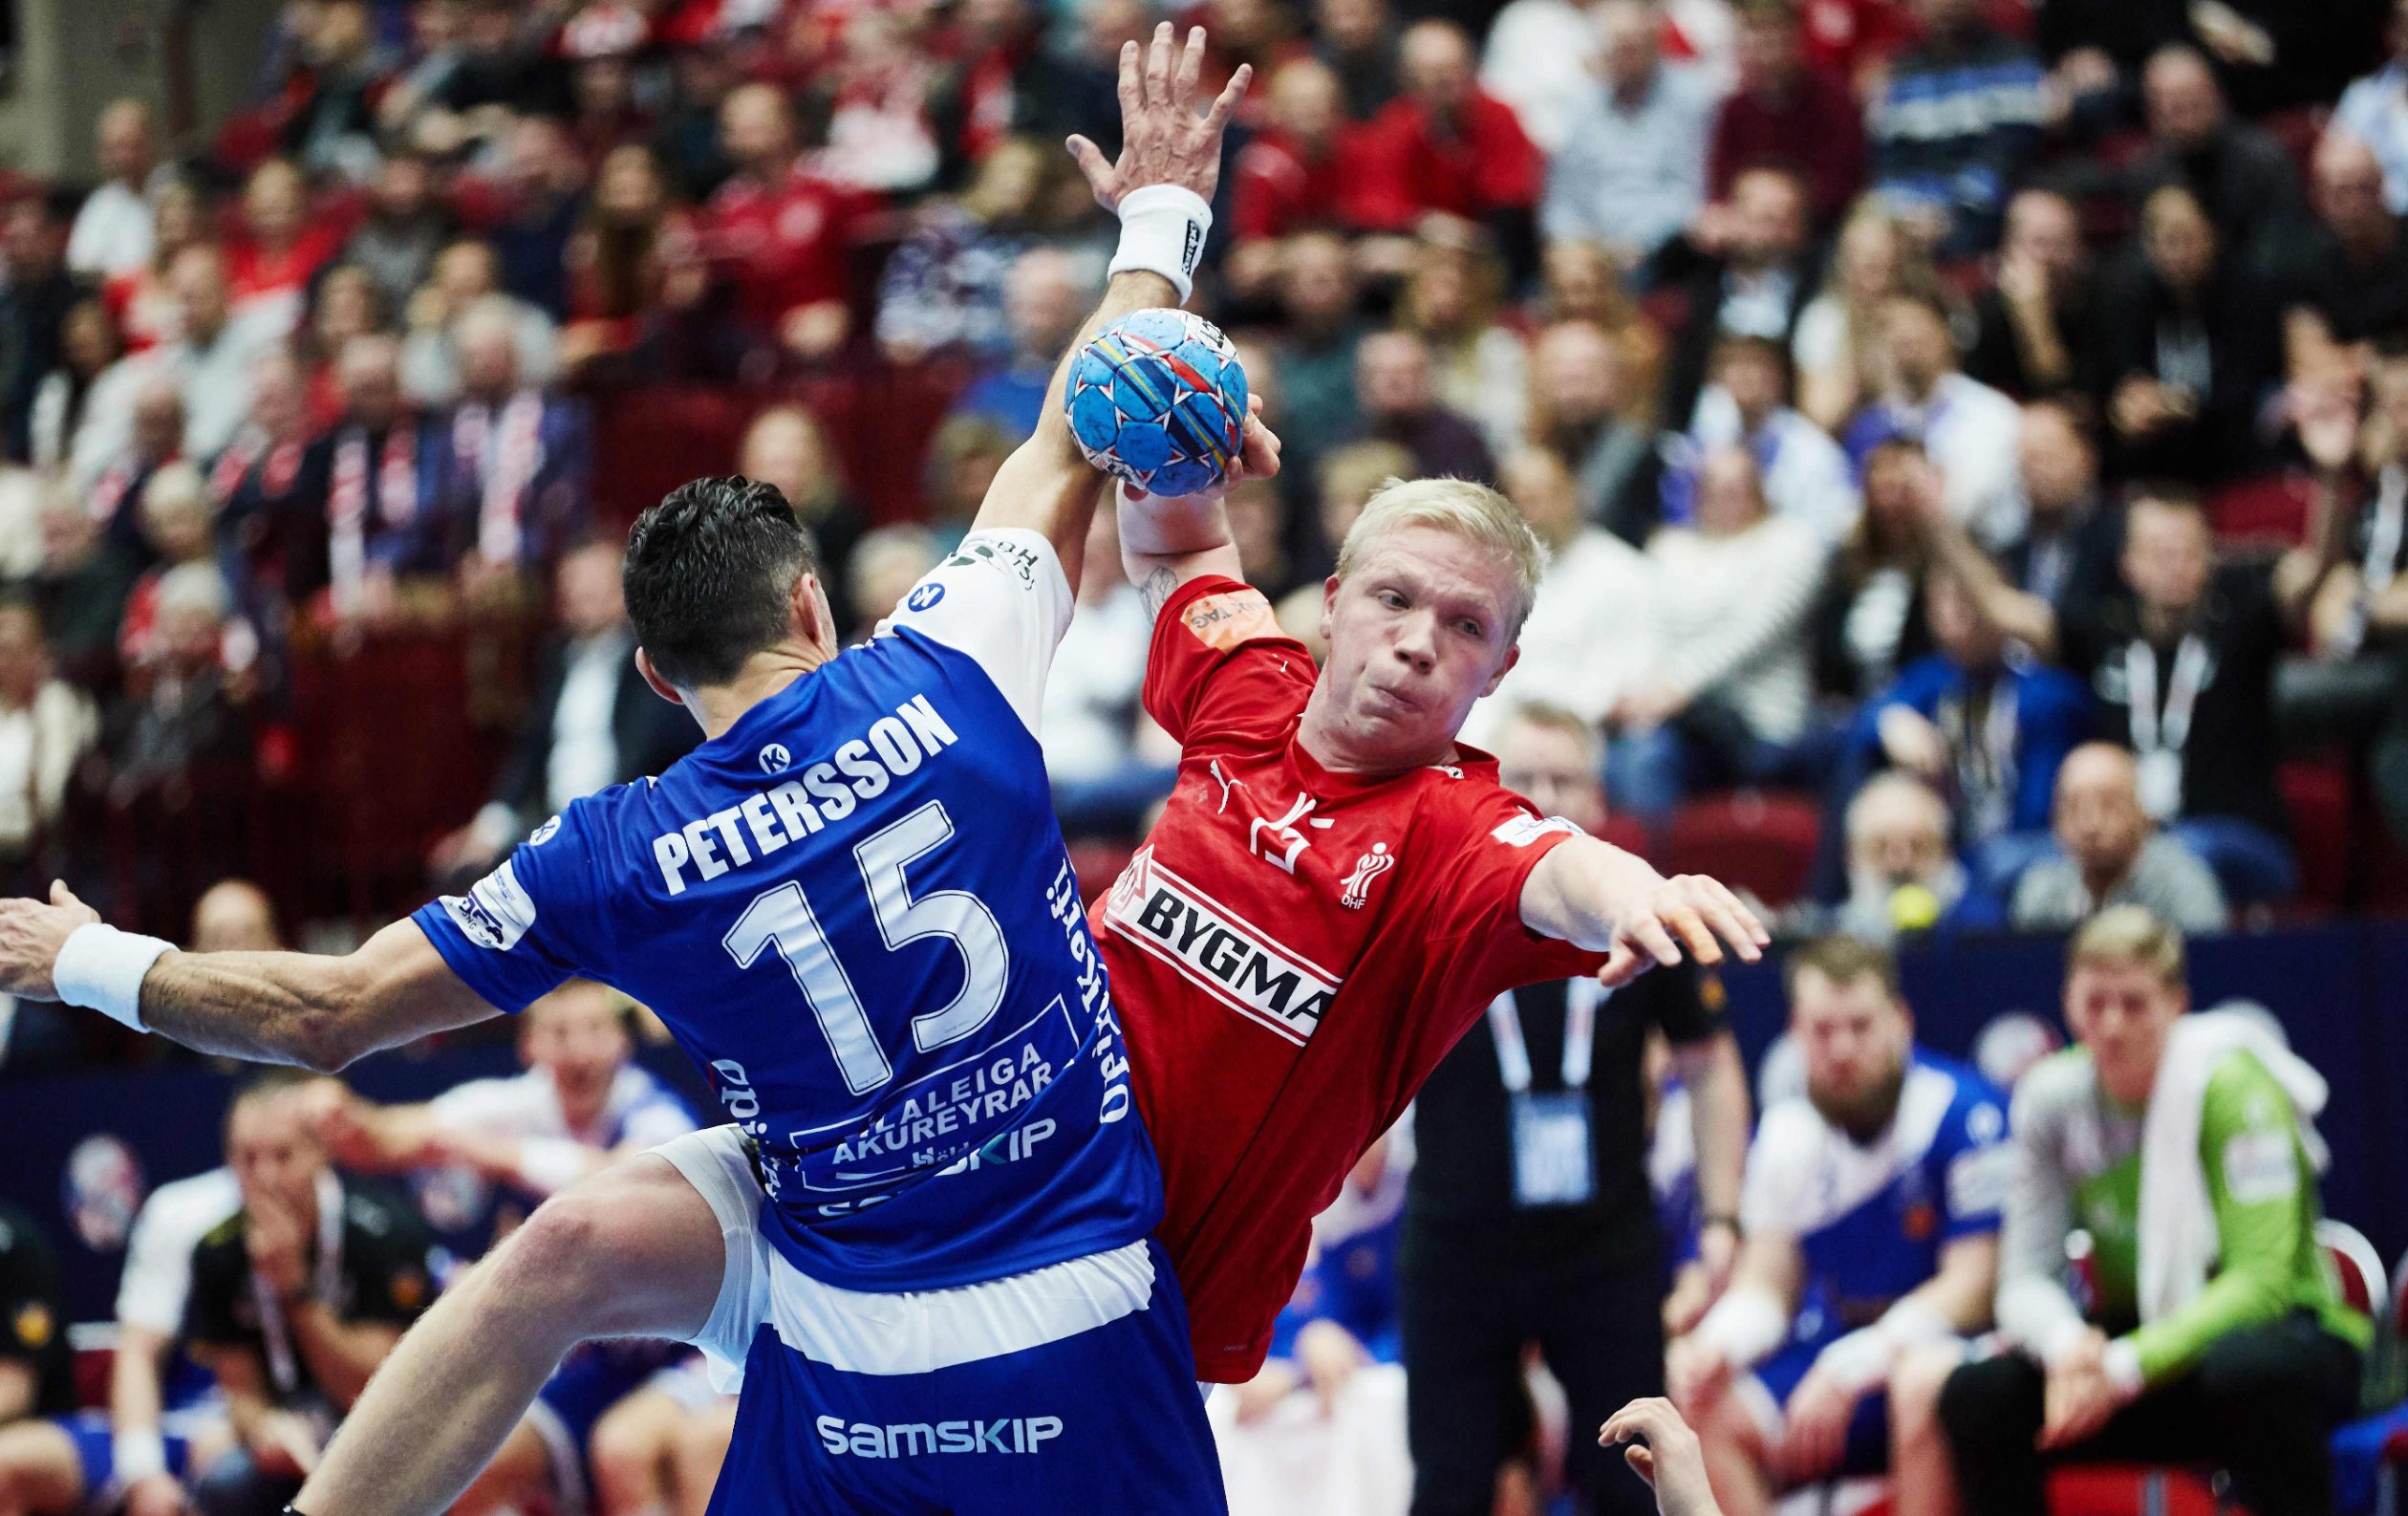 Denmark's Magnus Saugstrup Jensen (R) and Alexander Petersson of Iceland vie during the Men's EHF 2020 Handball European Championship preliminary round match between Denmark and Iceland in Malmo, Sweden on January 11, 2020. (Photo by Andreas HILLERGREN / various sources / AFP) / Sweden OUT